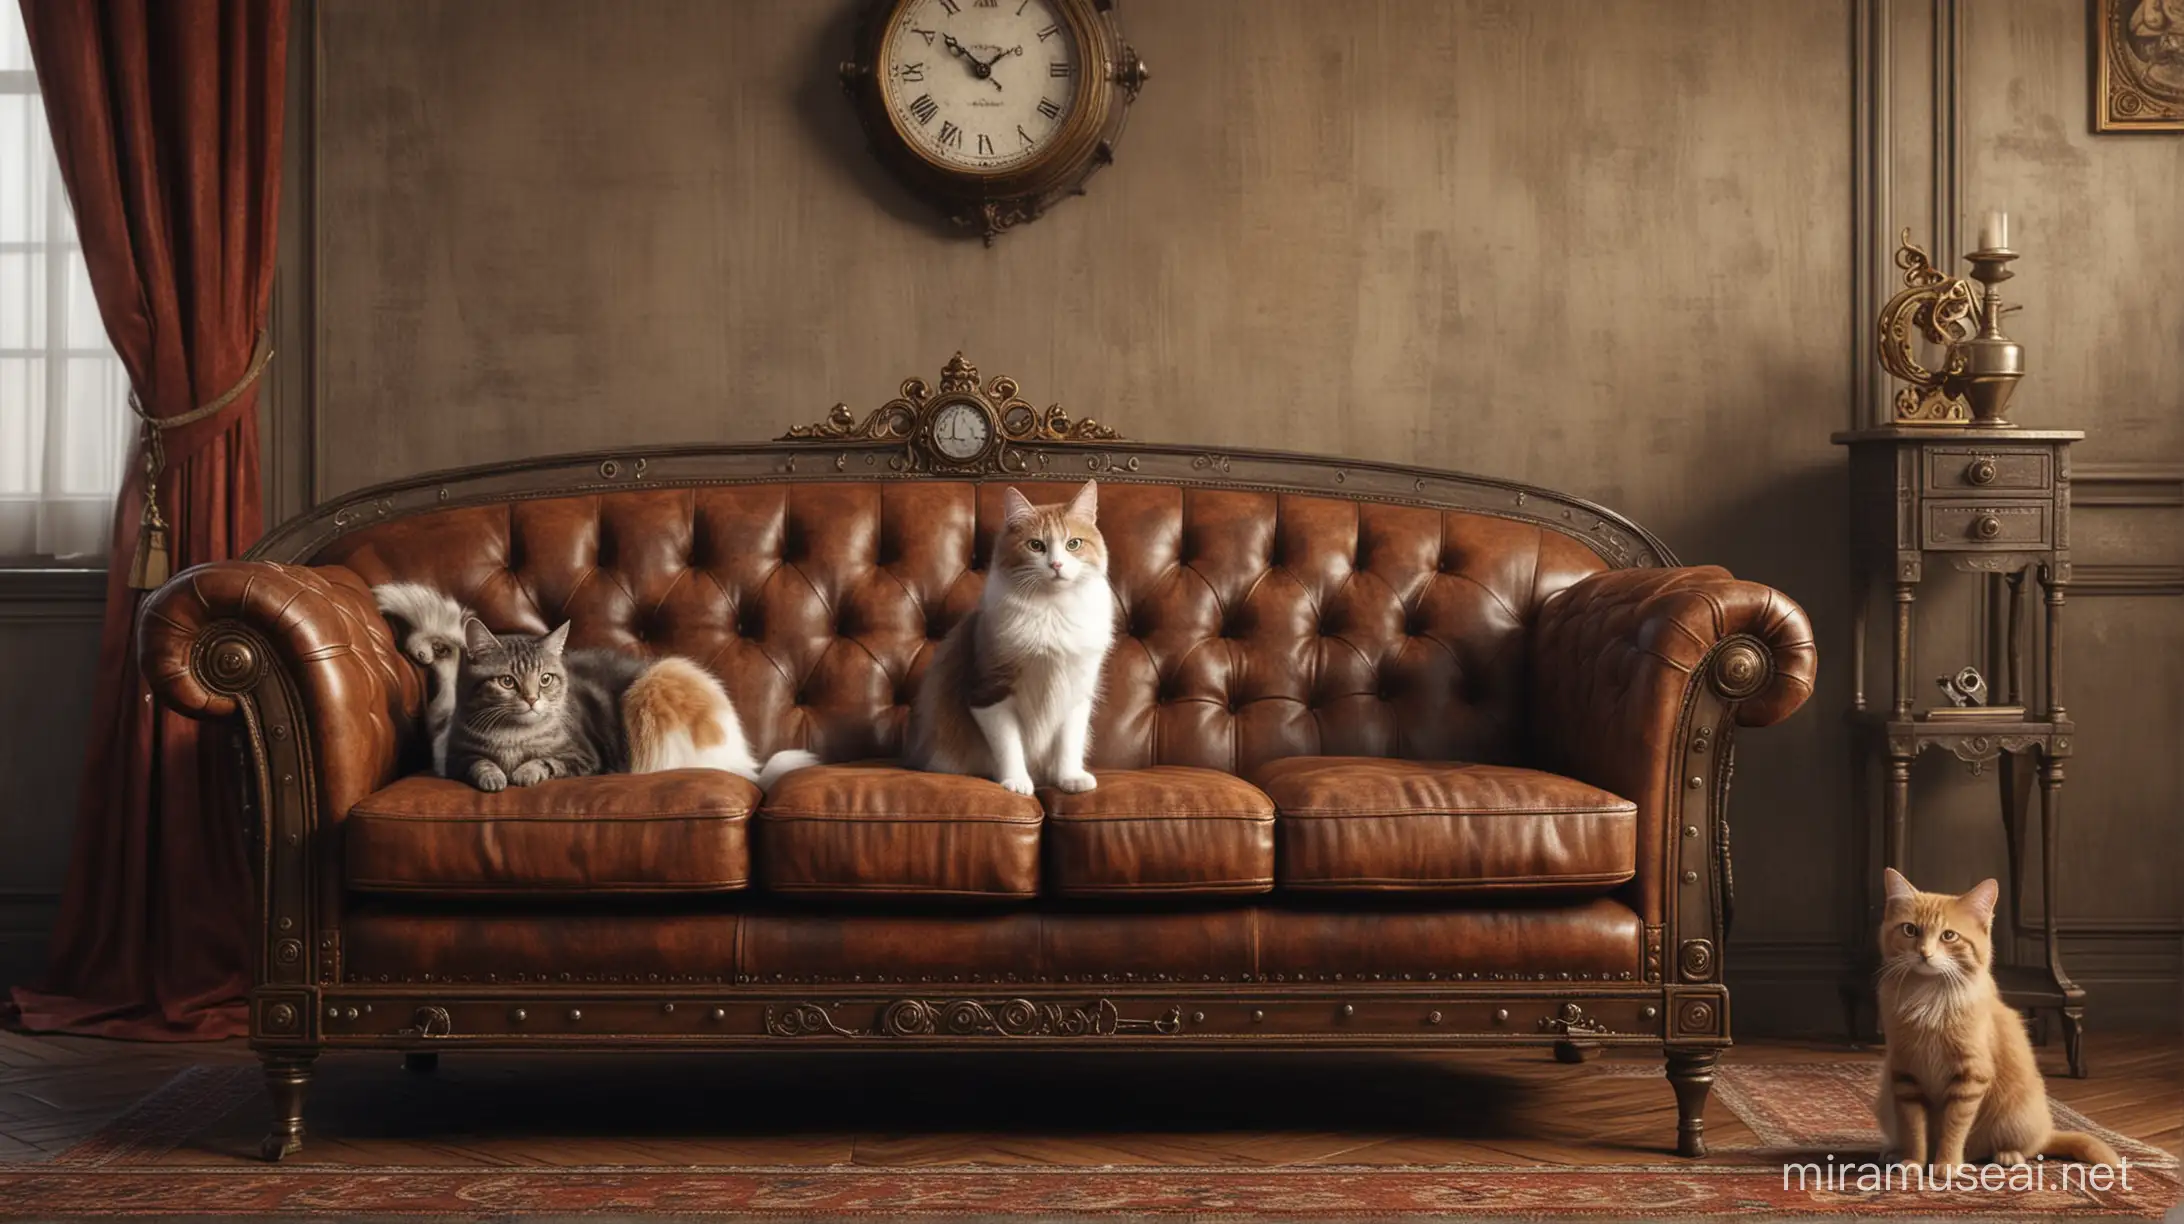 the dog and the cat sit on an elegant sofa in a steampunk living room hyper realistic ultra high resolution --ratio 16:9